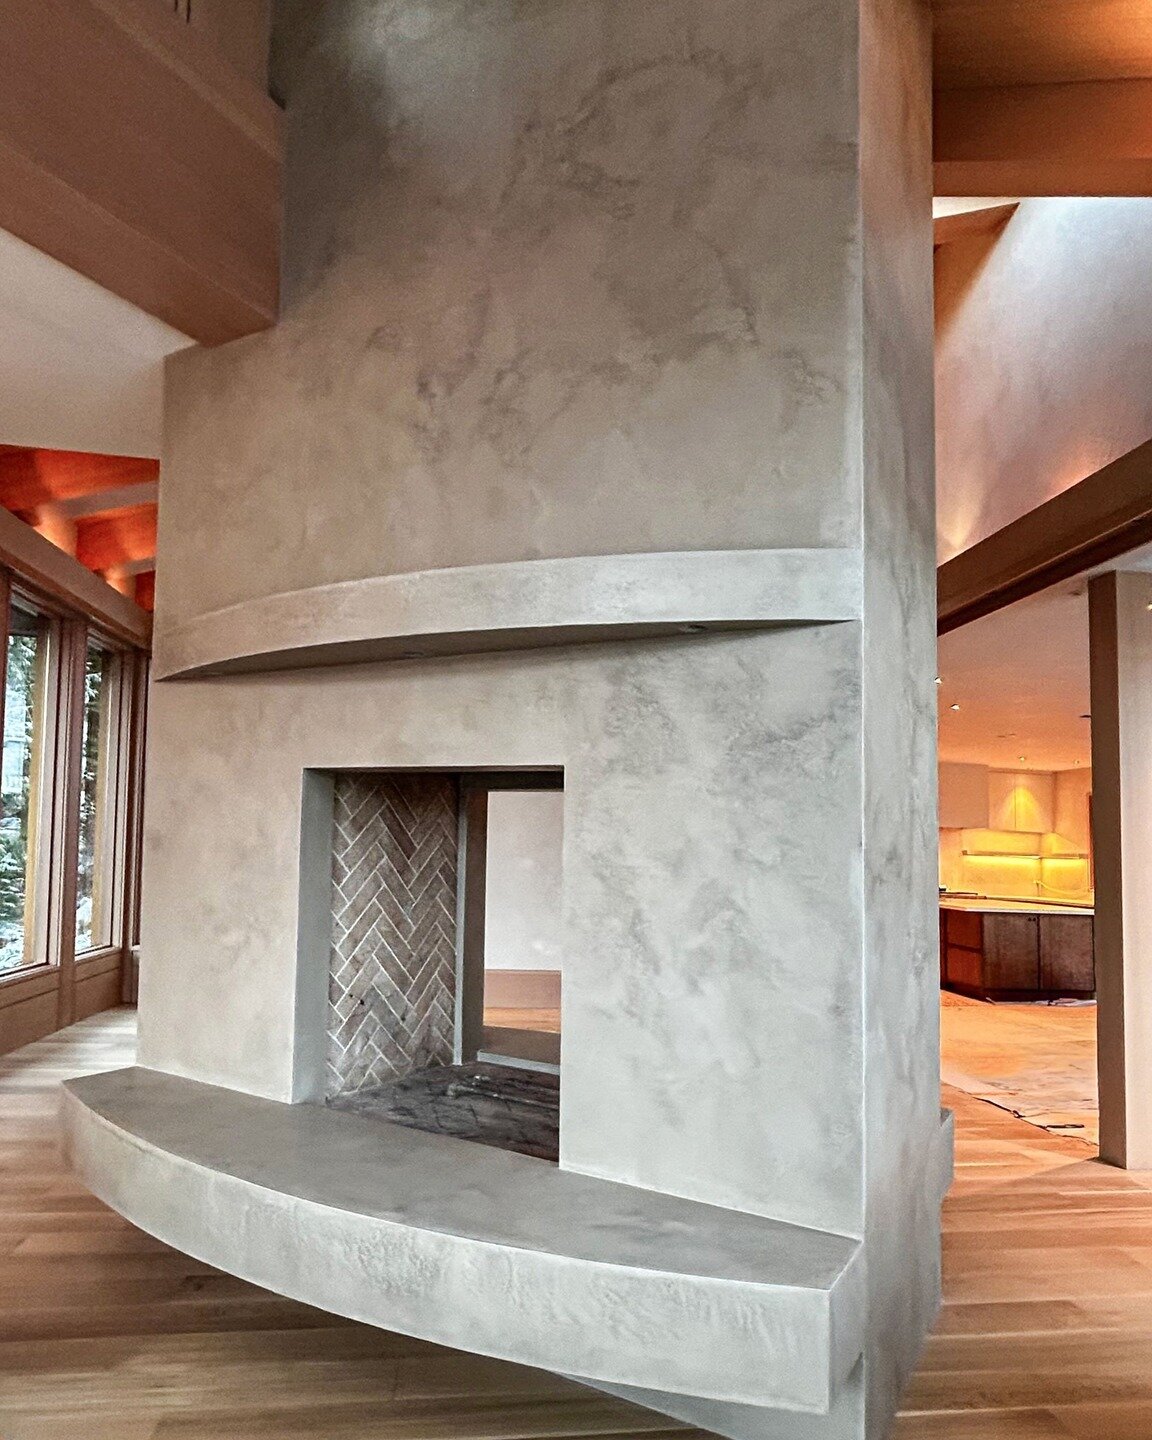 Had the opportunity to work on this incredible design created by @contemporaryhouse This type of finish refined the space with the Tadelakt lime plaster finish. @coastaldesigncontracting 

#Whistlerinteriordesign #Whistlerdesign #whistlerhomes
#whist